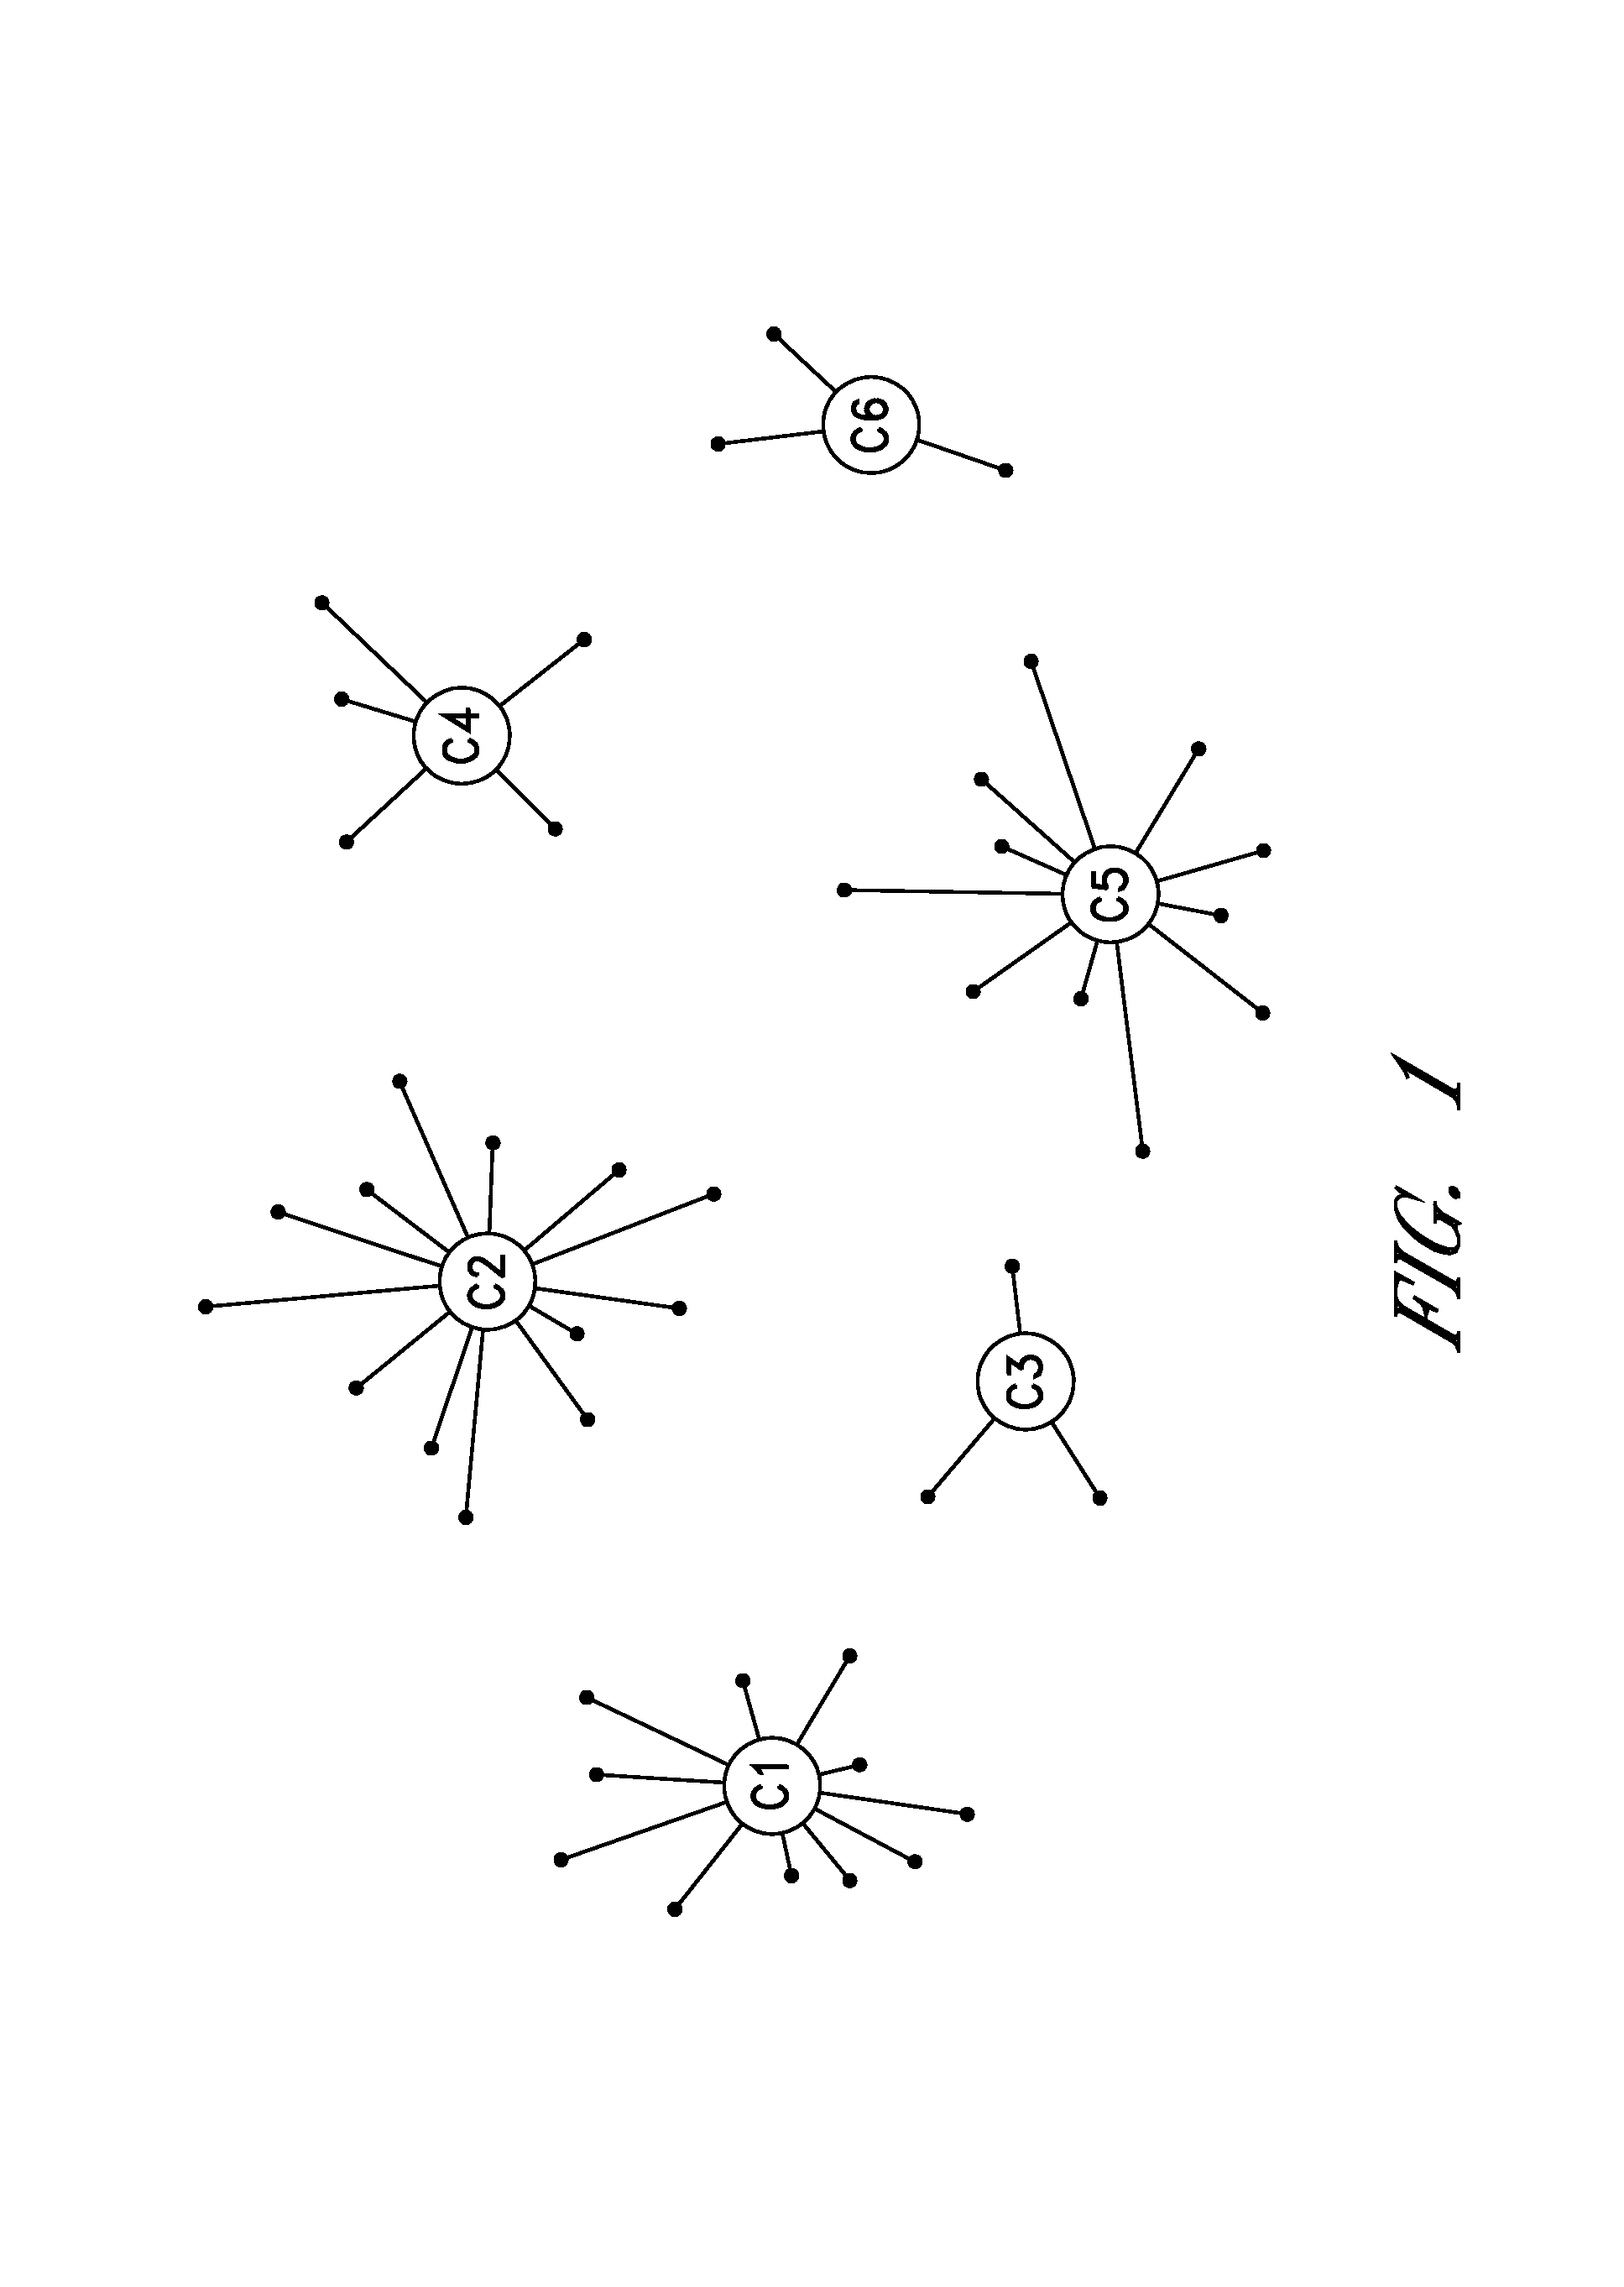 Method, system, and medium for cluster-based categorization and presentation of item recommendations